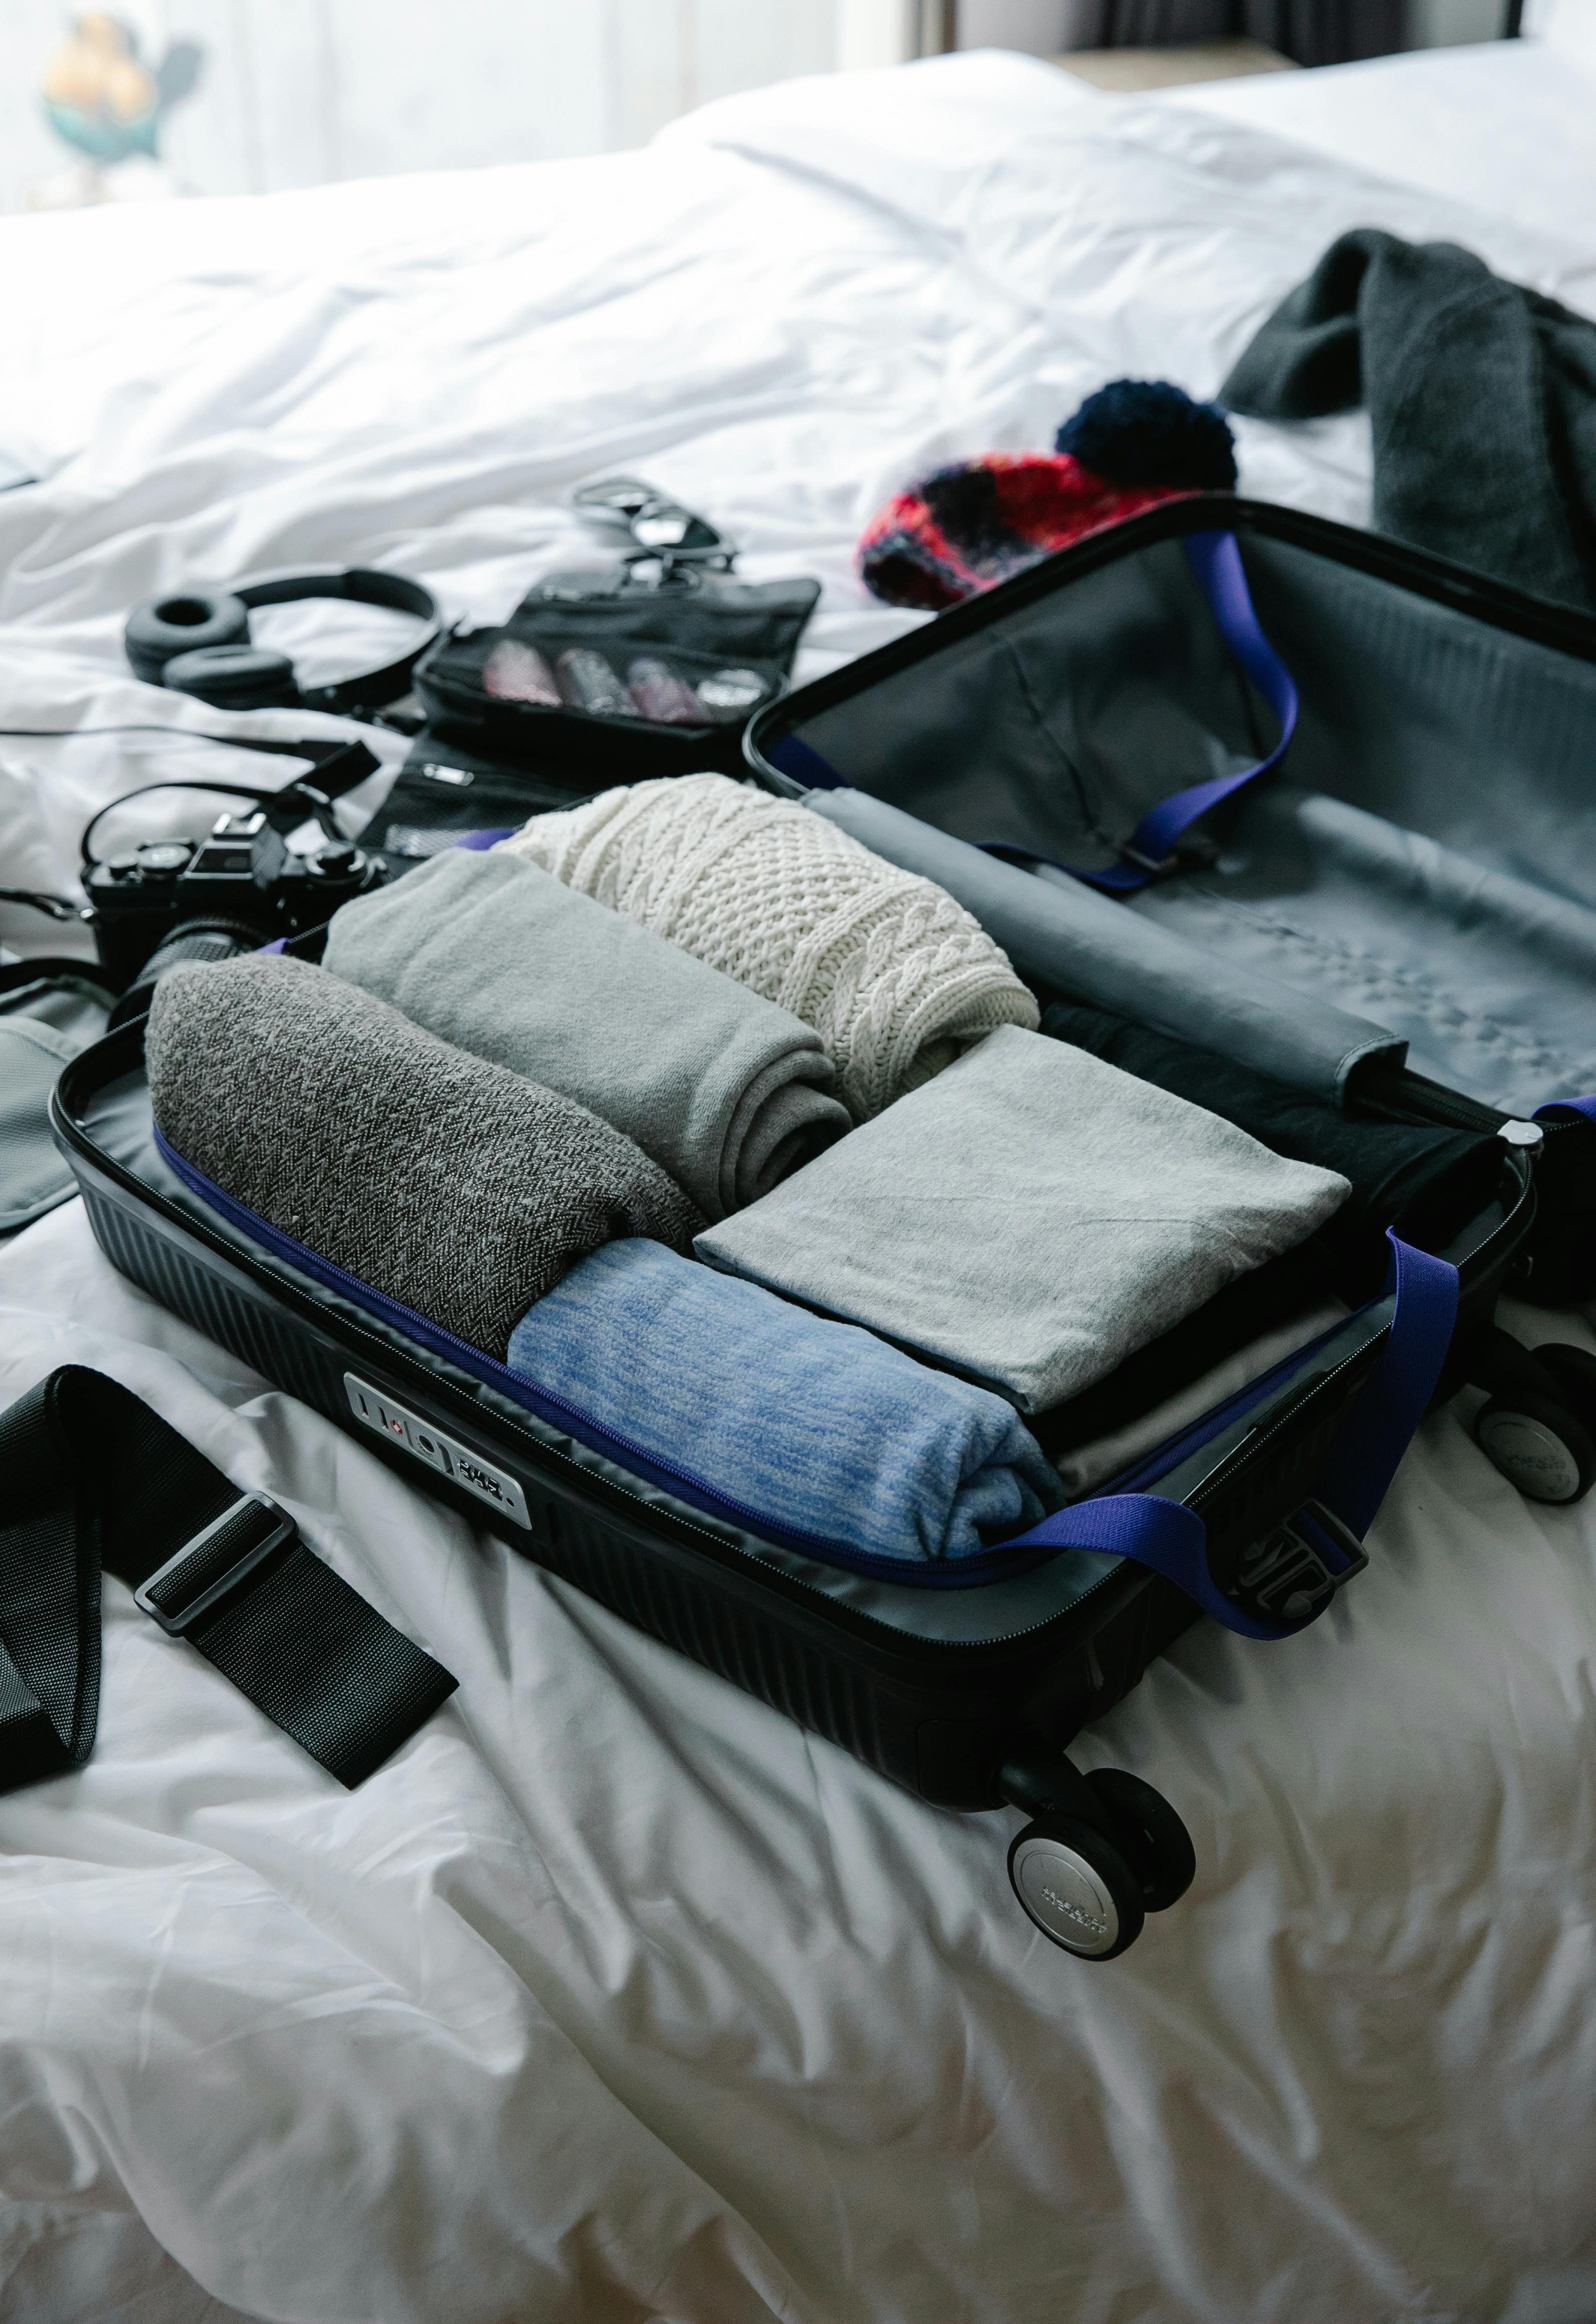 A suitcase with clothes | Source: Pexels